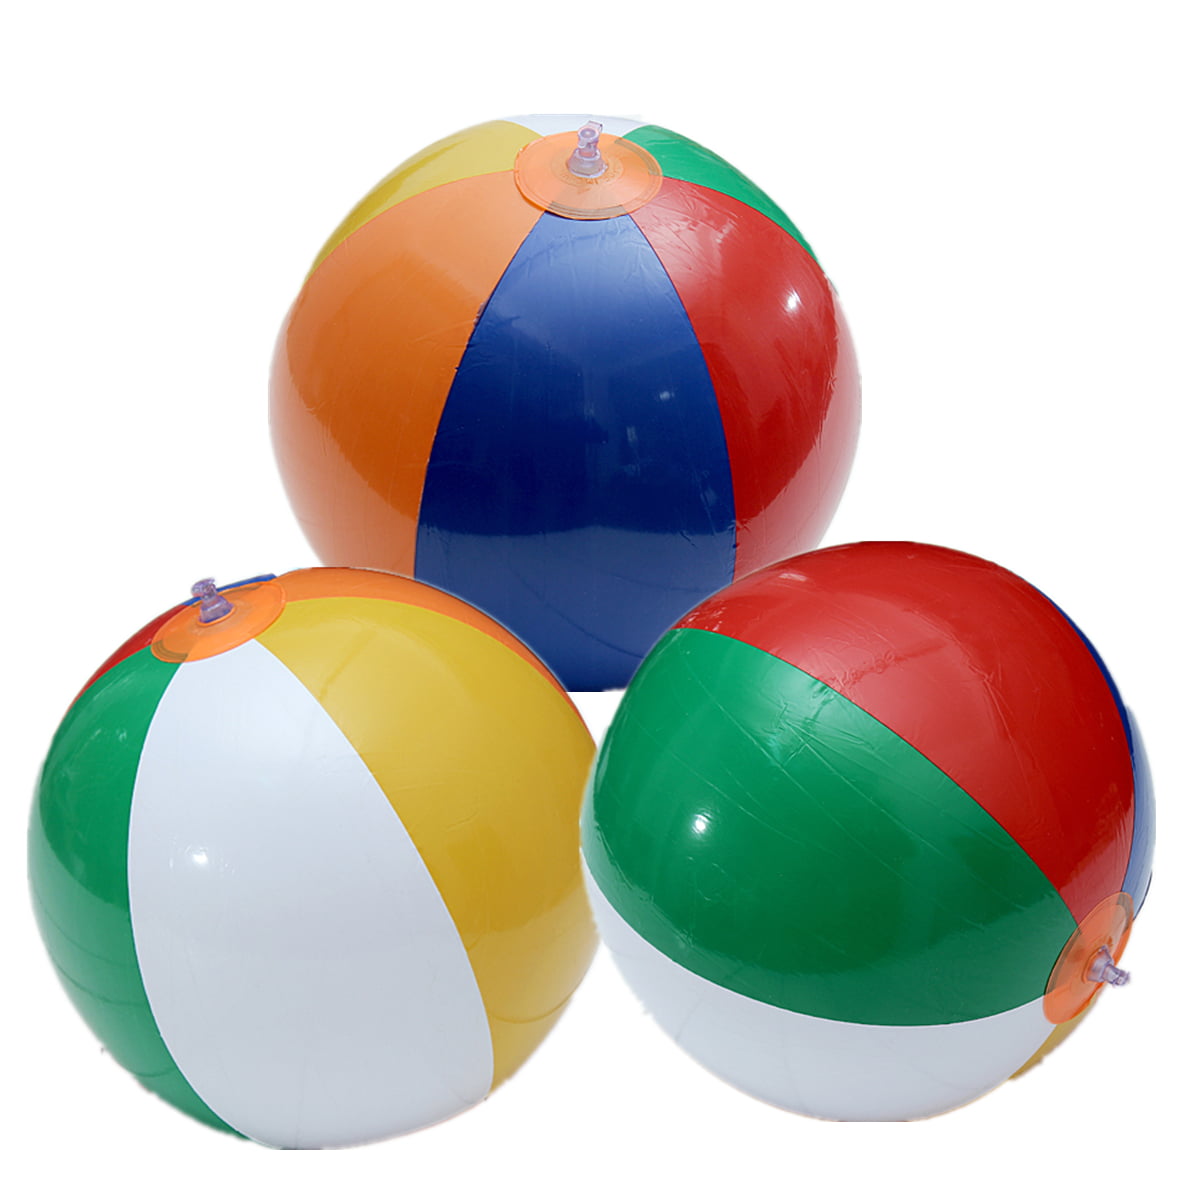 2pcs 9'' PVC Beach Ball Football Inflatable Sports Soccer Volleyball Game Toy 